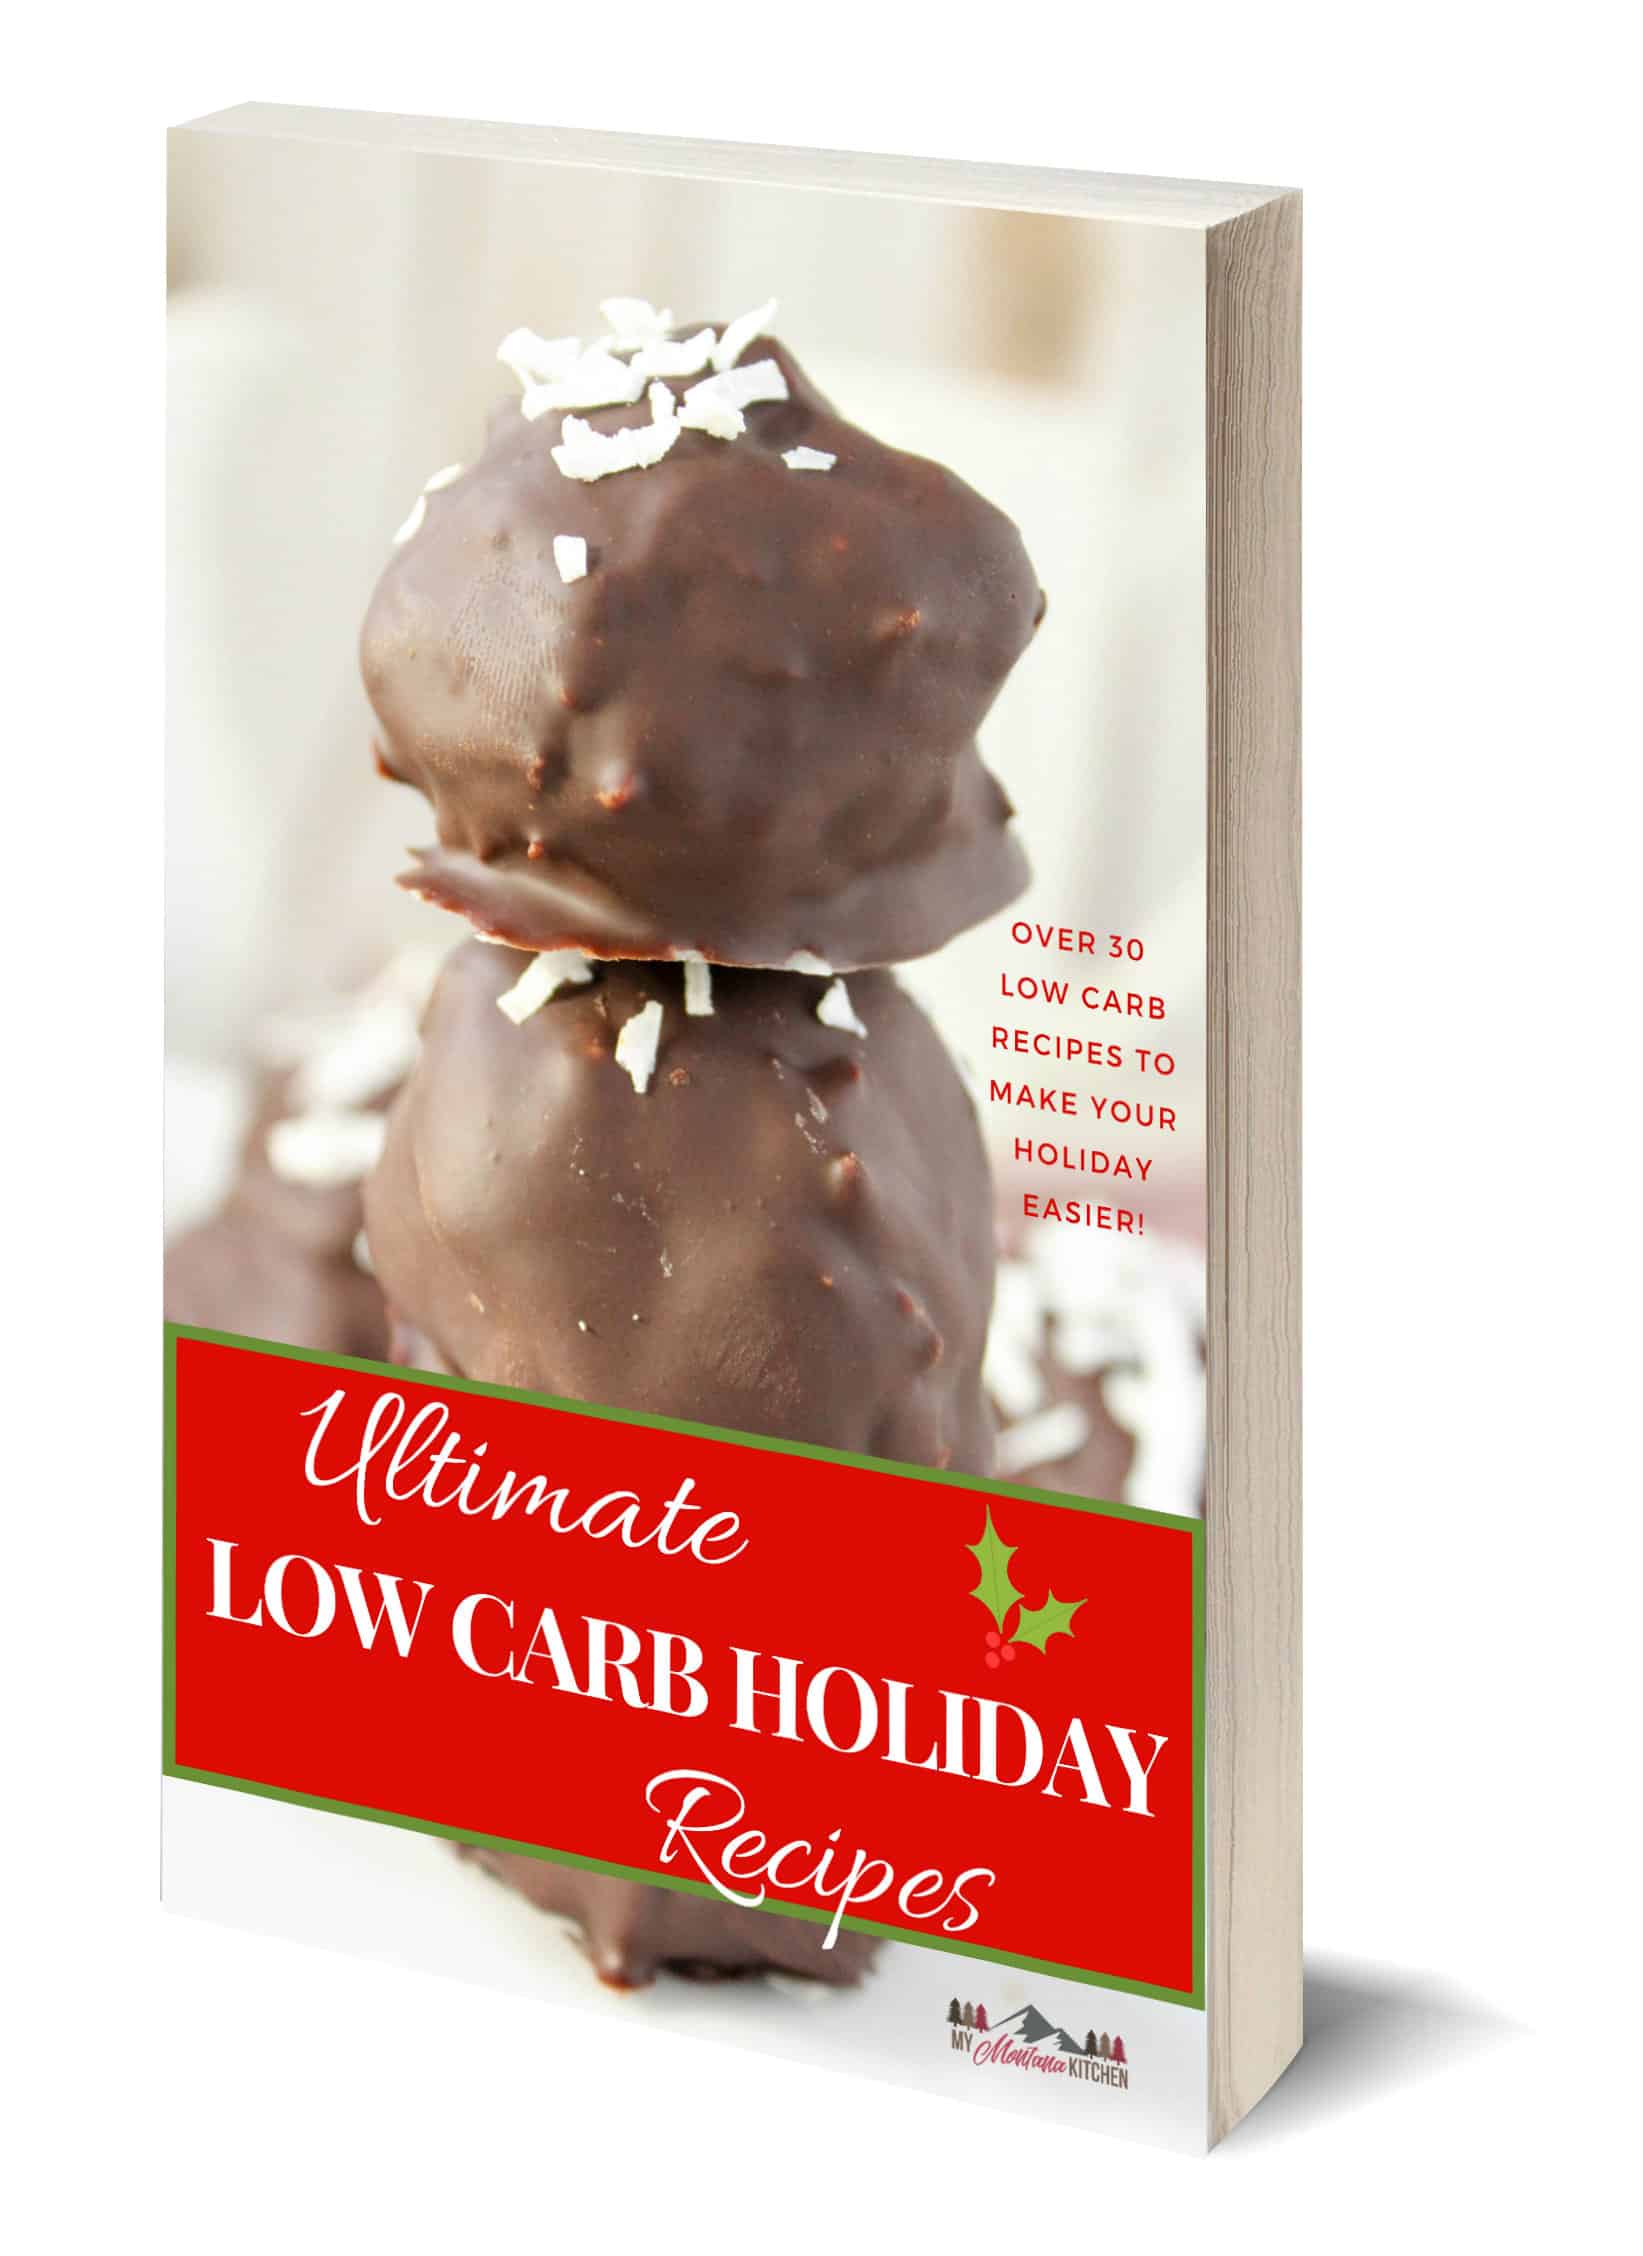 If you need Low Carb Holiday Recipes, check out this ebook! Filled with low carb and keto recipes, this ebook is an invaluable resource for the Holidays! #lowcarbholiday #ketochristmas #keto #lowcarb #sugarfreechristmas